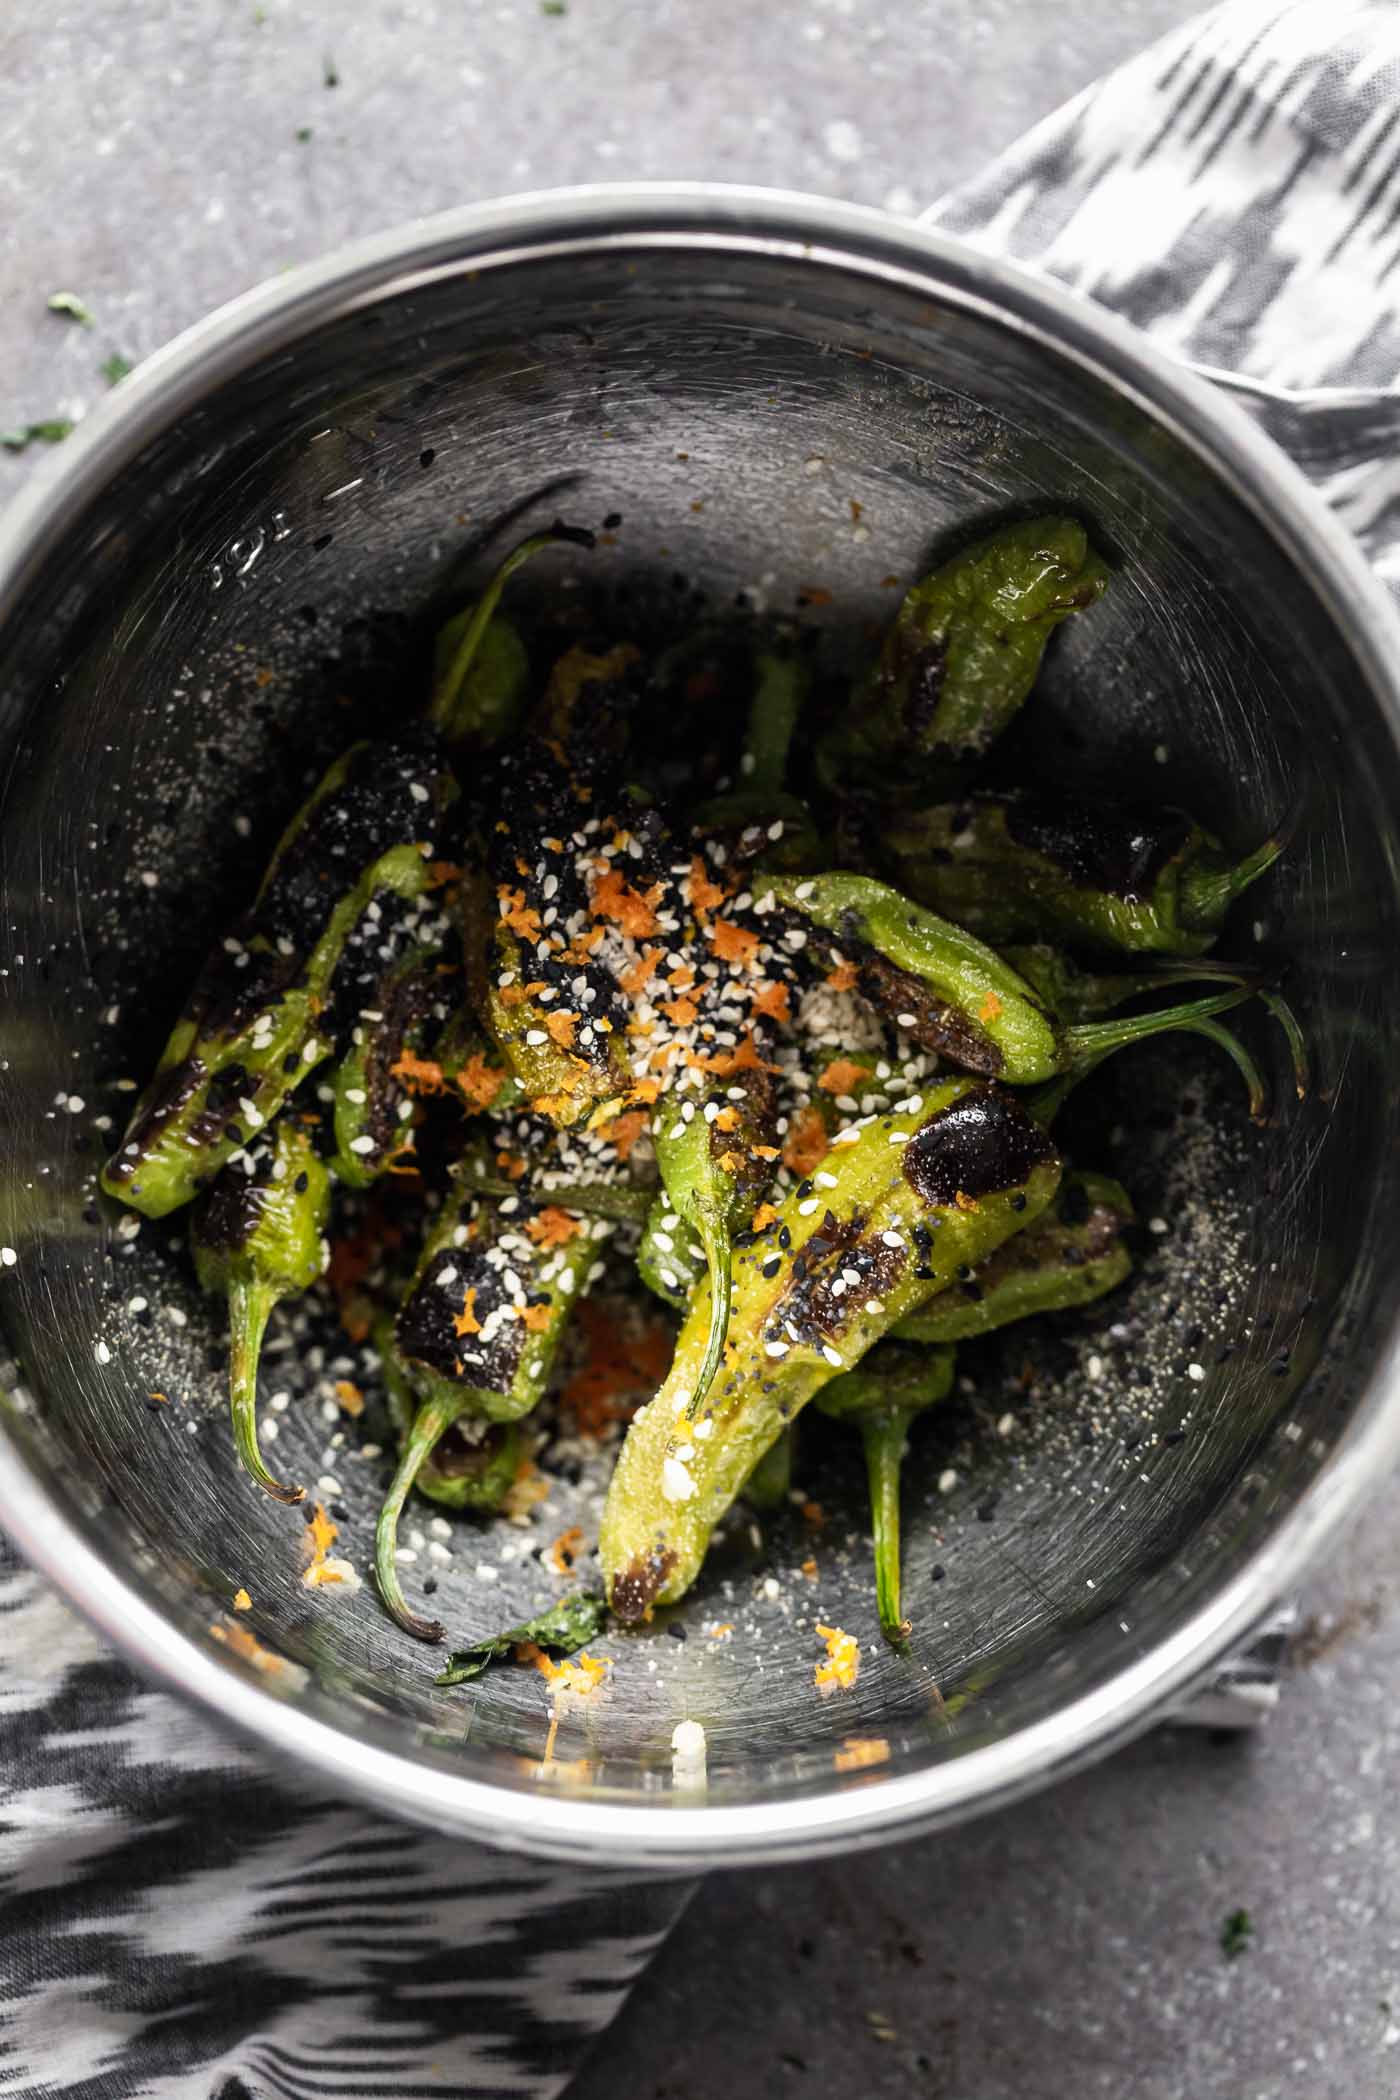 These Roasted Shishito Peppers with Soy Glaze are the perfect blend of sweet, spicy and savory. Each pepper is charred under the broiler, then tossed in an easy soy-based glaze, sesame seeds and a little bit of orange peel. The perfect snack!